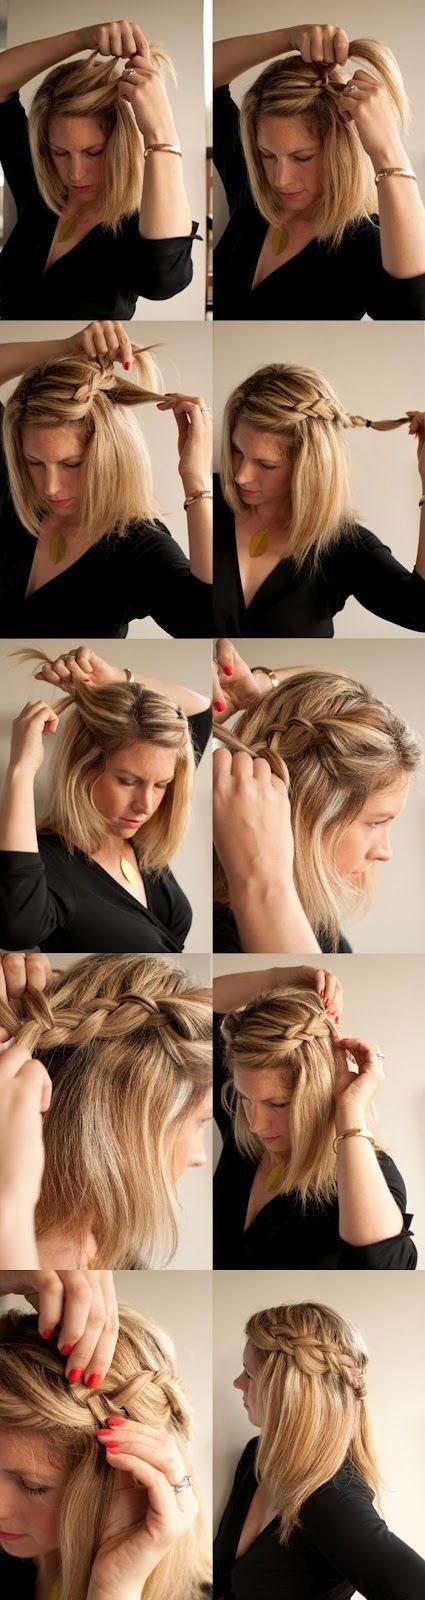 Pretty hairstyles for shoulder length hair pretty-hairstyles-for-shoulder-length-hair-23_18